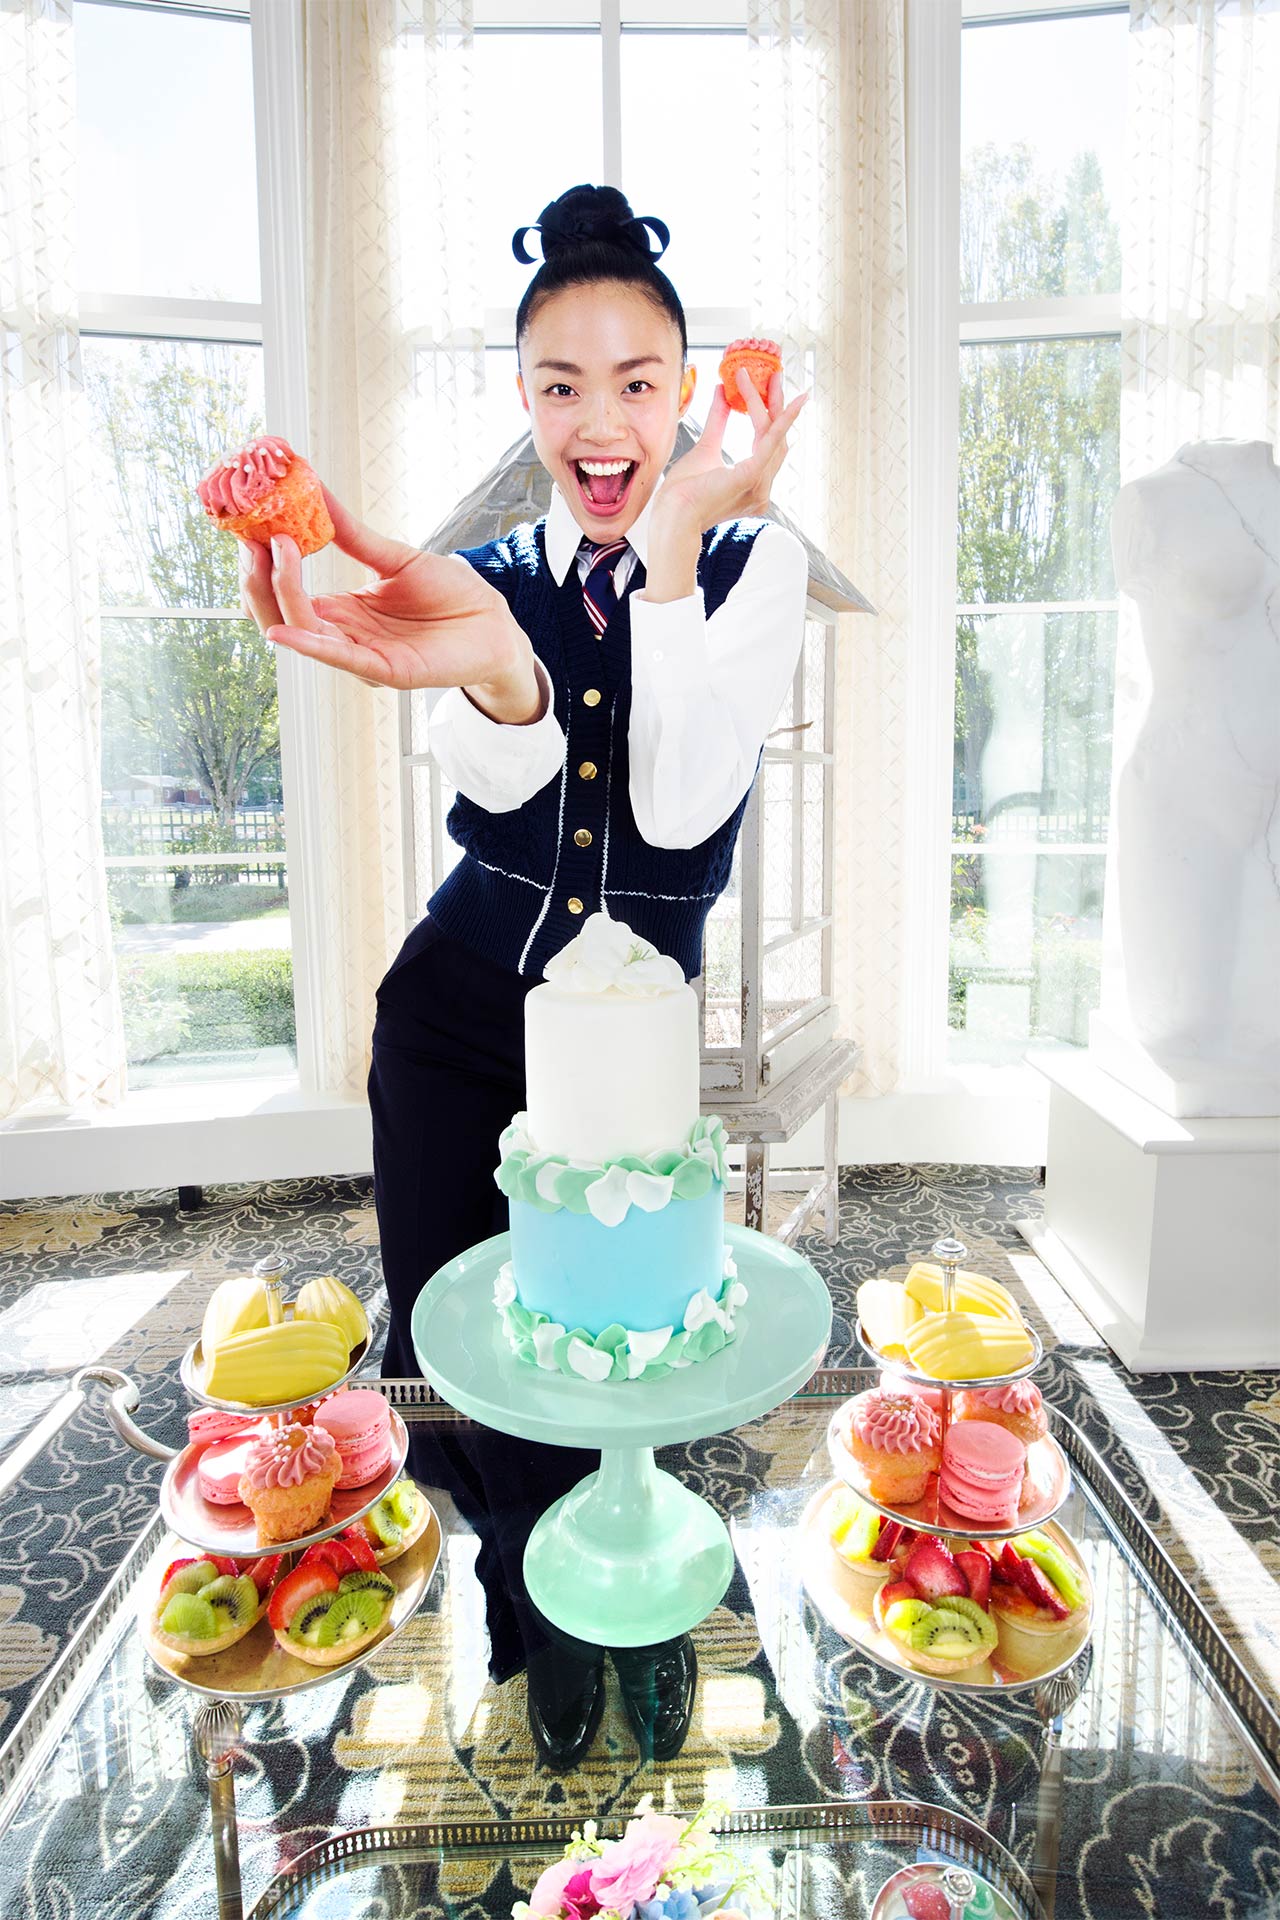 Waitress holding up cupcakes and standing behind a table of desserts